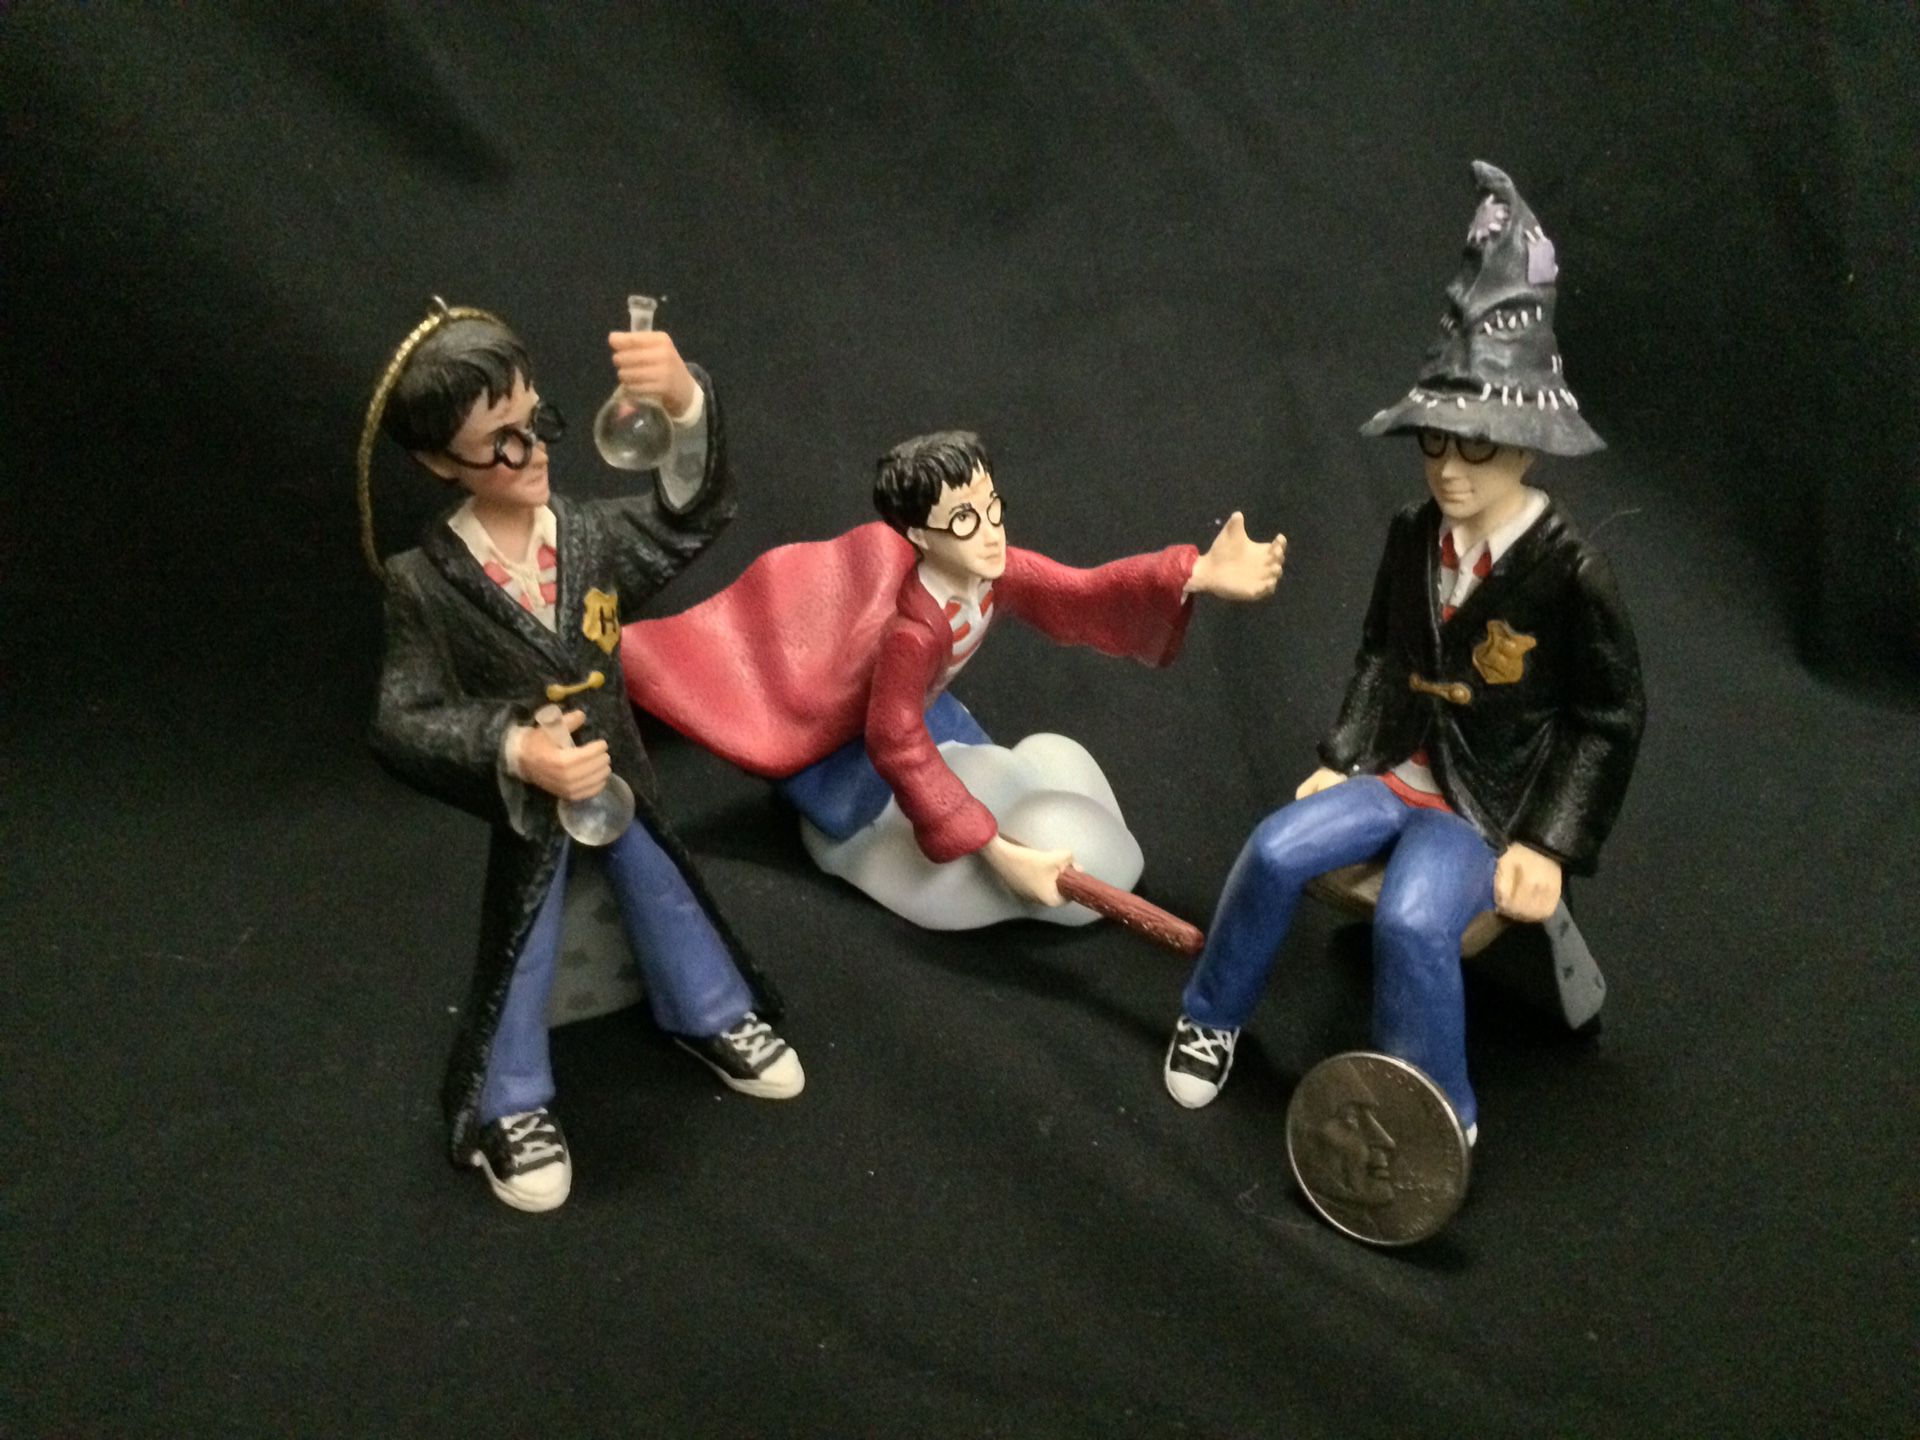 Collectible Harry Potter figurines